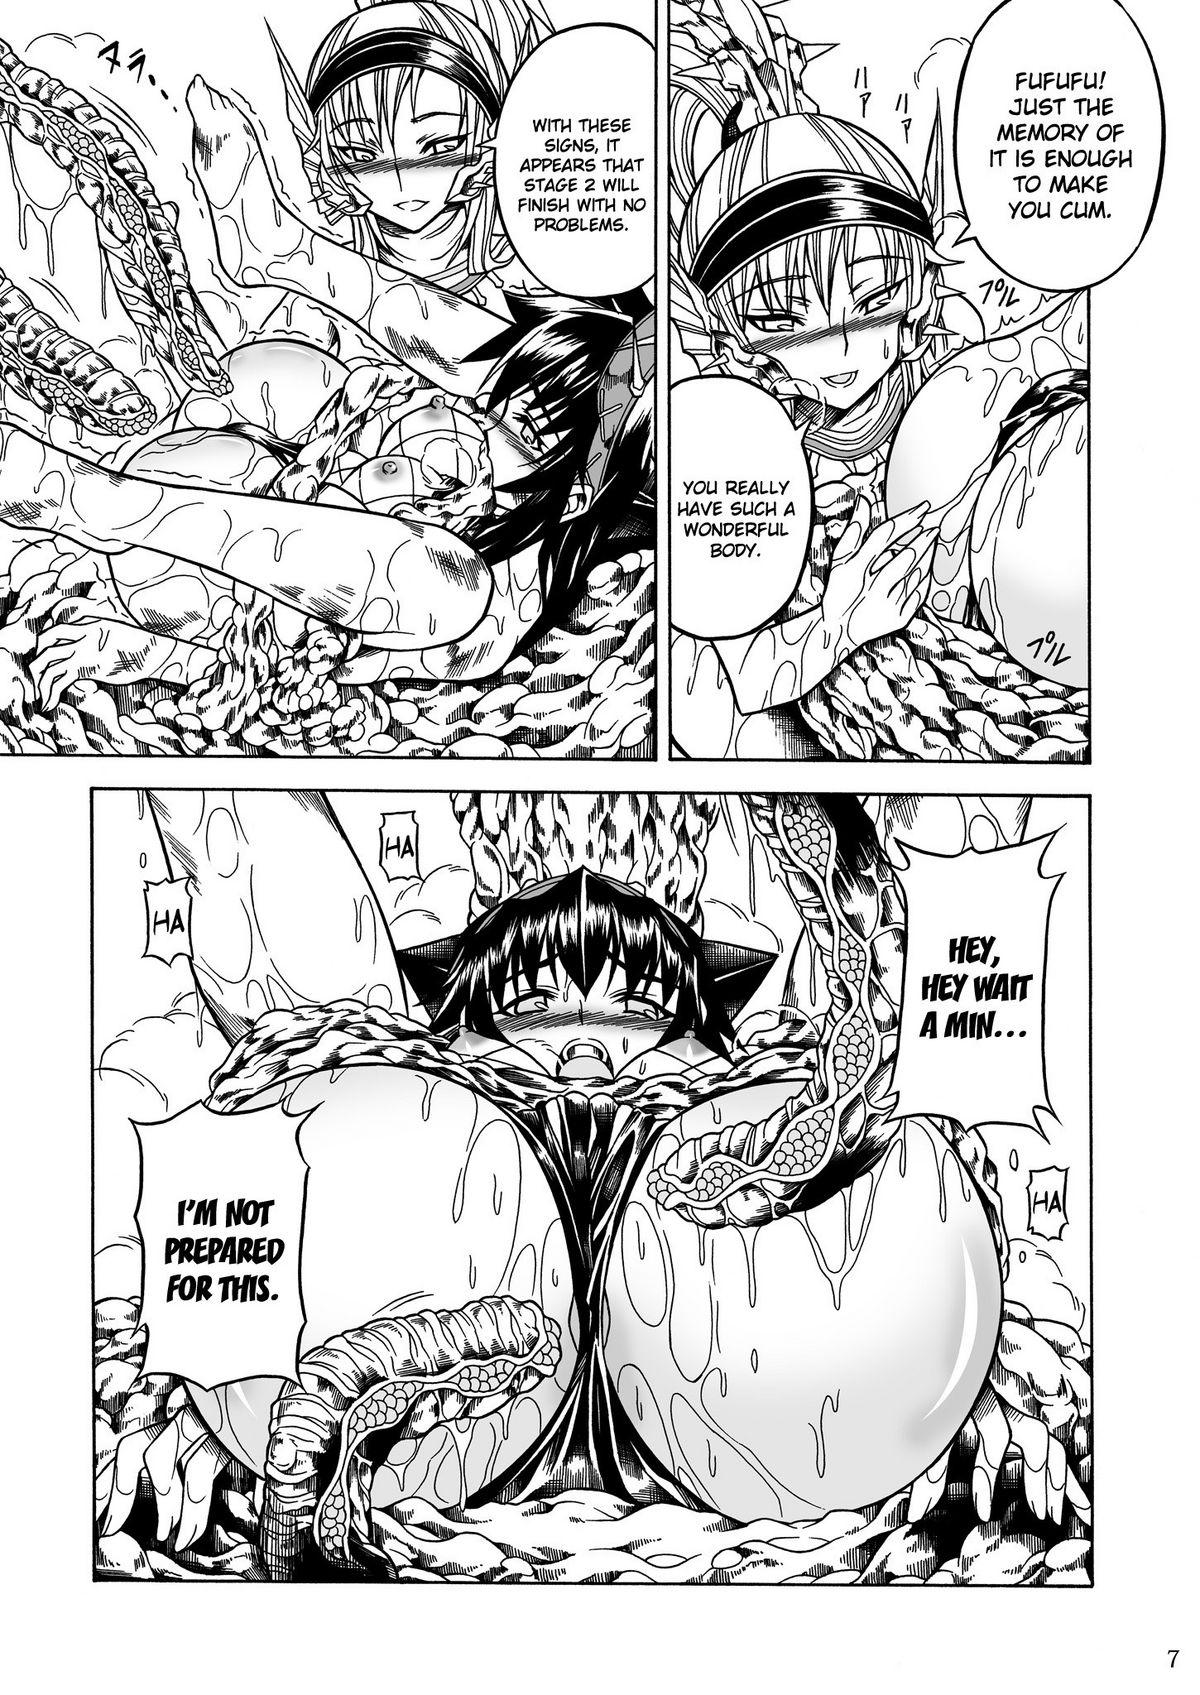 Ass Licking Solo Hunter no Seitai 2 The third part - Monster hunter Prima - Page 7